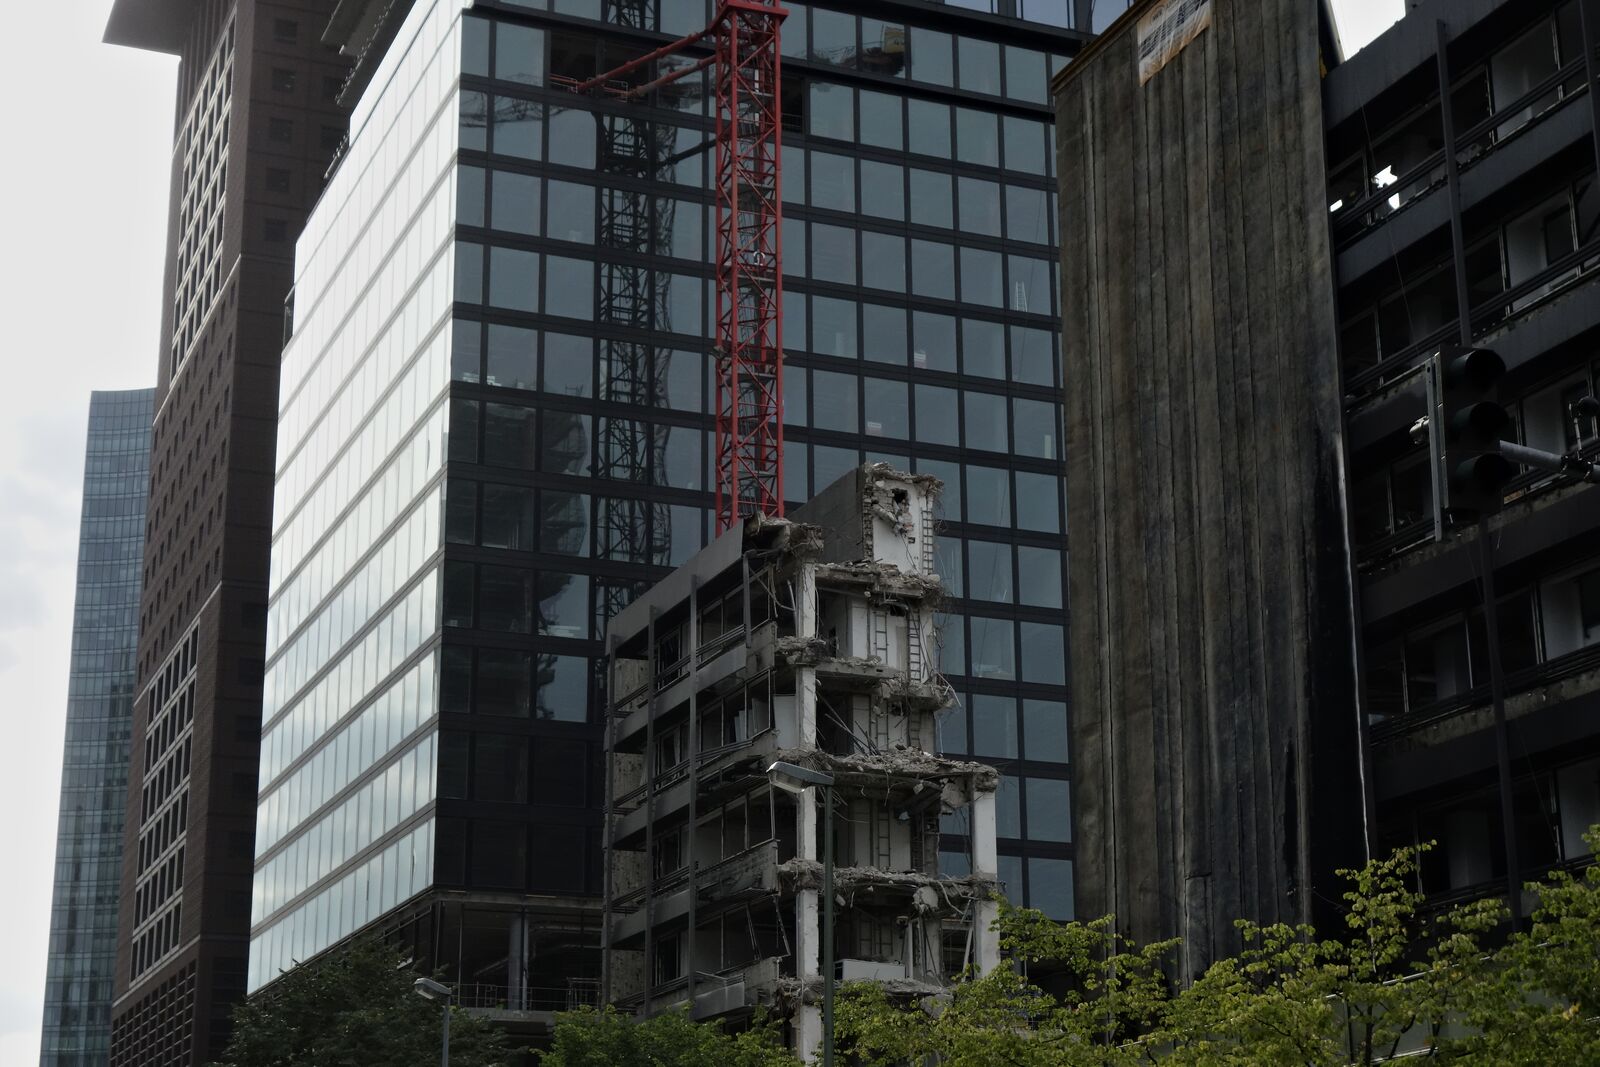 Photograph: demolition of a skyscraper or large office building. Only the last stump is left. The scene is very dark (all buildings are black), and ominous. There's a dark red construction crane and a multi-story tarp hanging from the adjacent building.